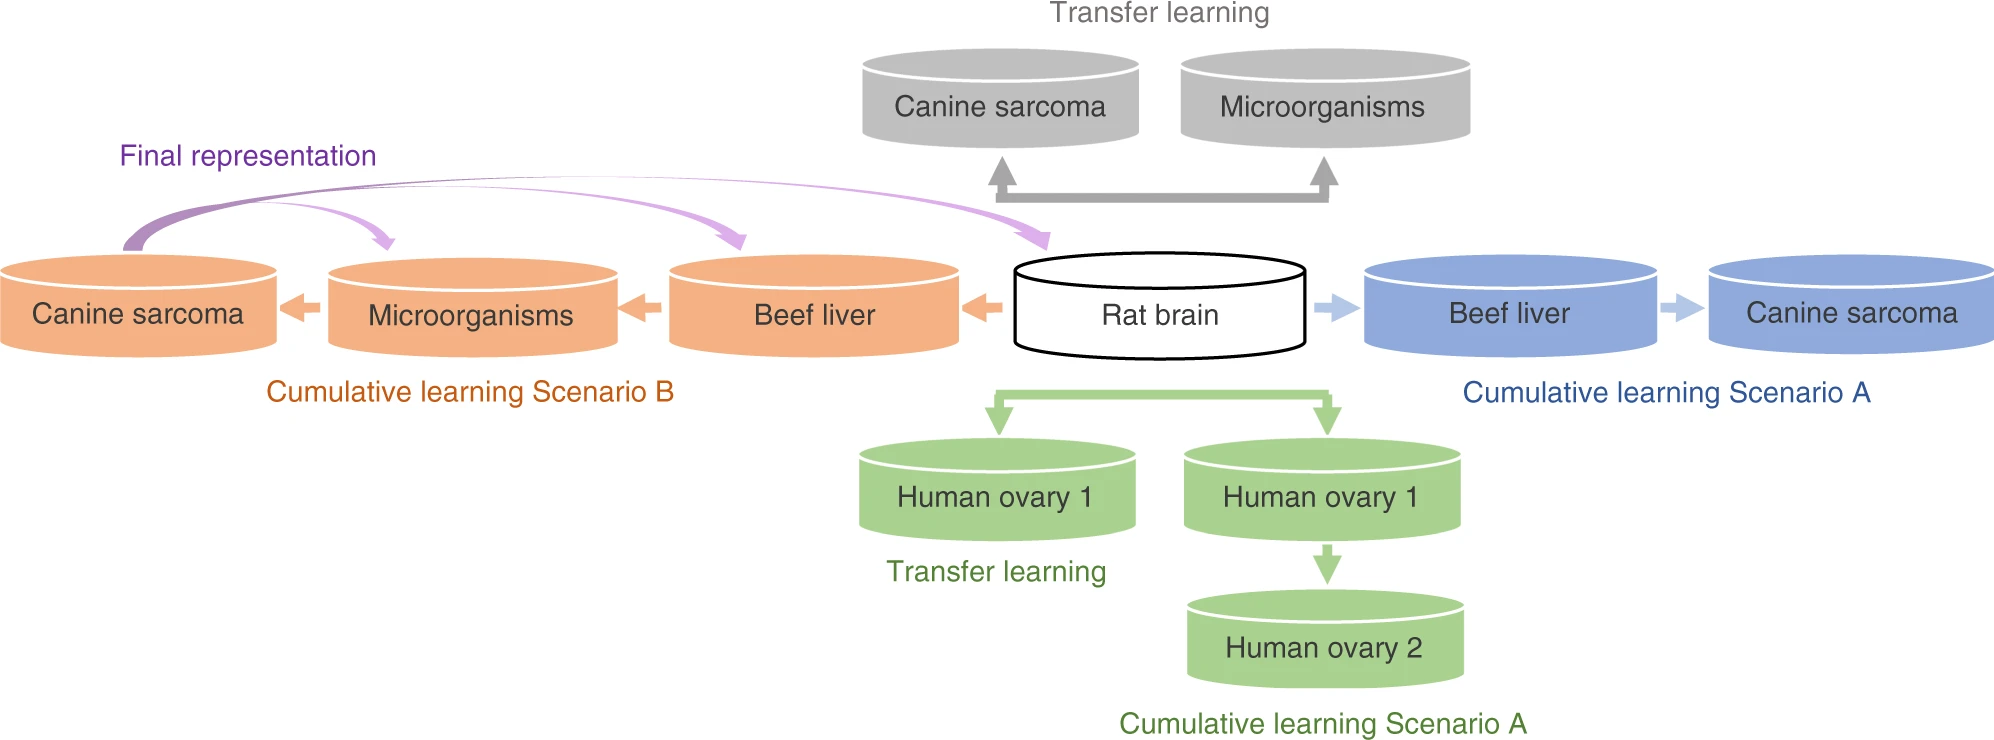 By cumulative learning Scenario A (in blue for canine sarcoma and in green for human ovary 2). By cumulative learning Scenario B (in orange for canine sarcoma). Final representation of Scenario B is tested on the datasets used during the training (in purple arrows).